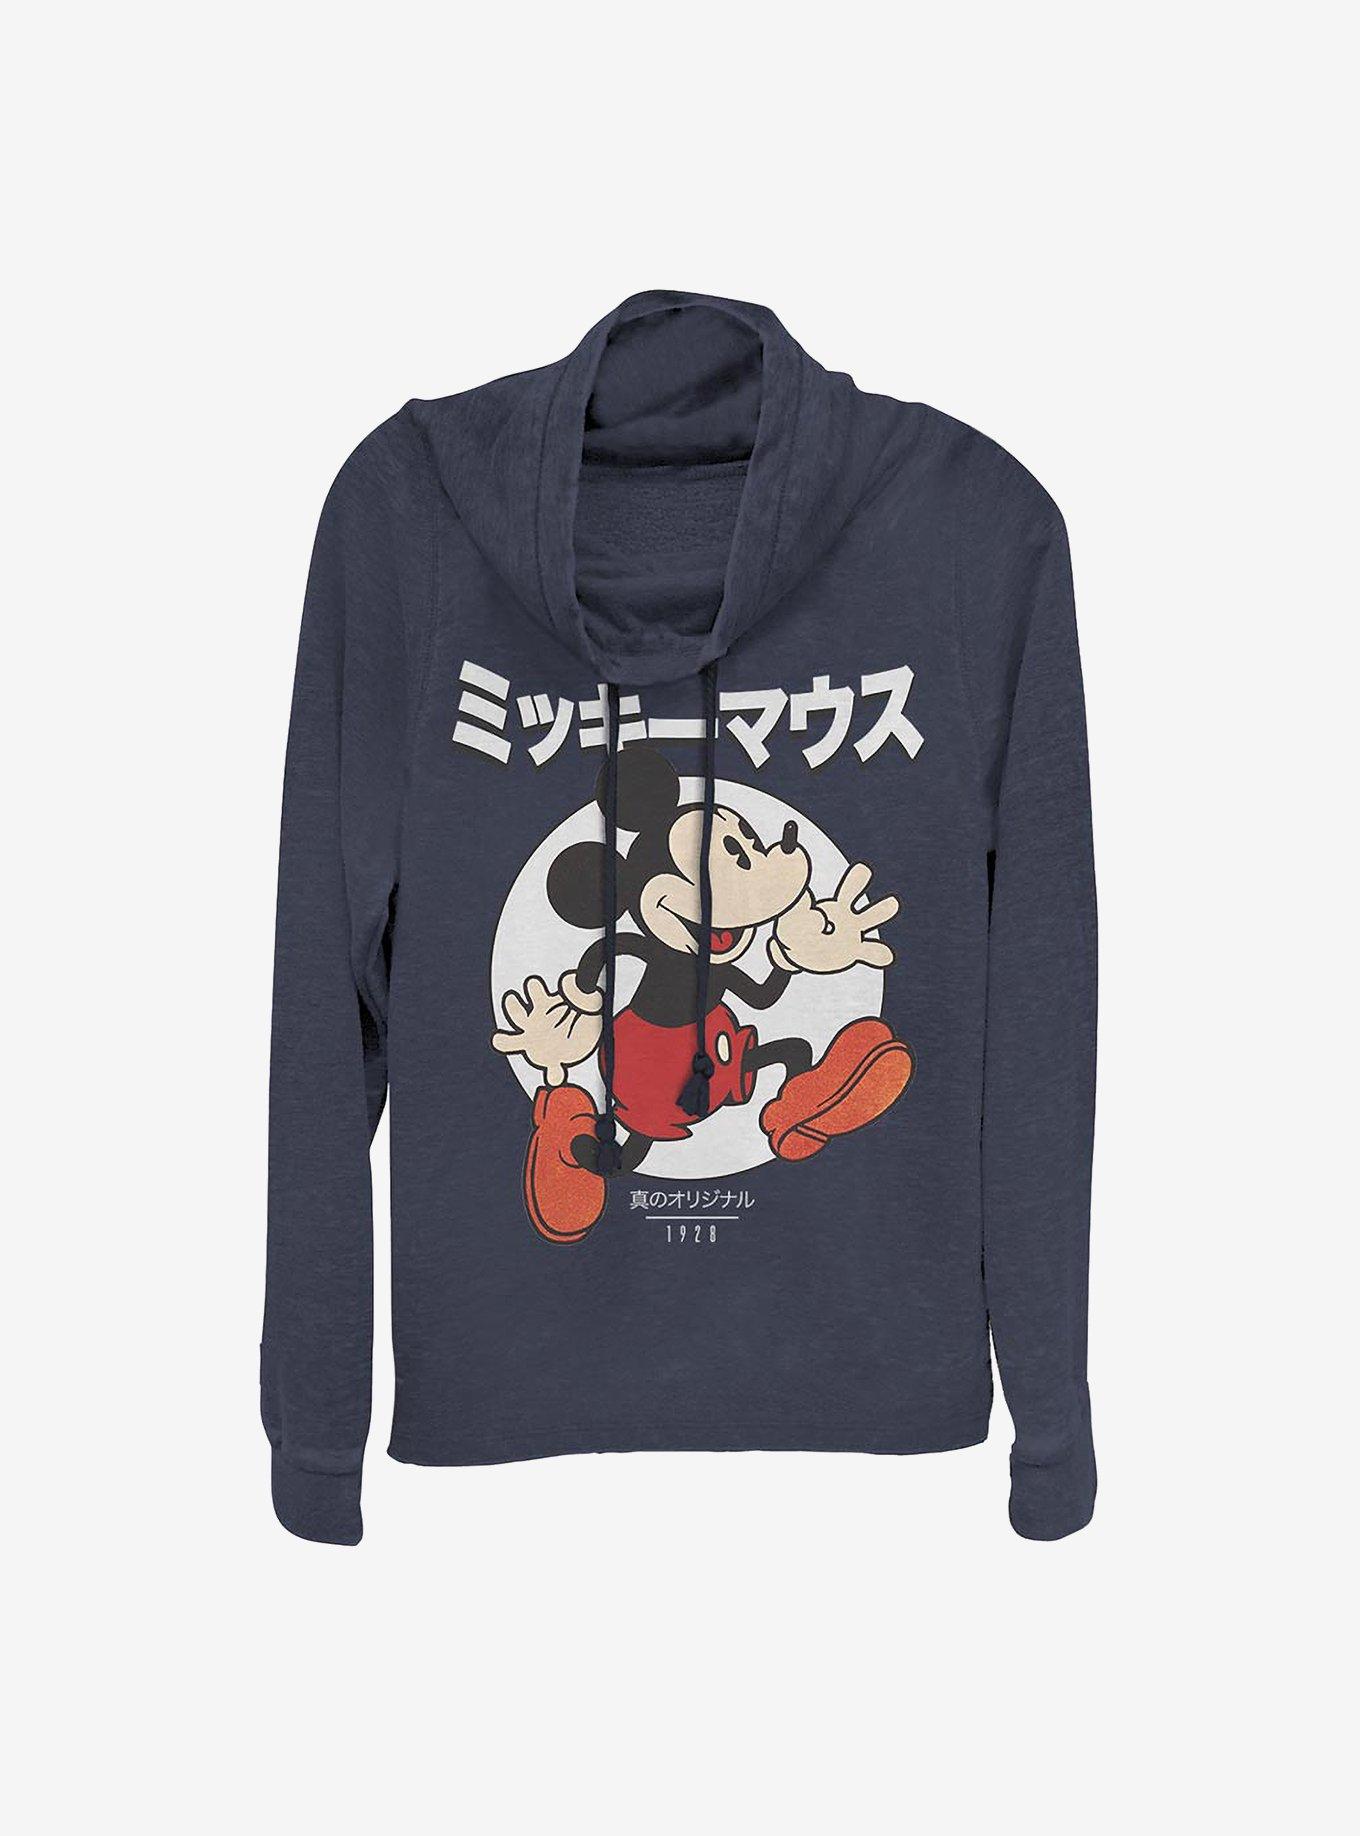 Disney Mickey Mouse Japanese Text Comic Cowlneck Long-Sleeve Girls Top, NAVY, hi-res